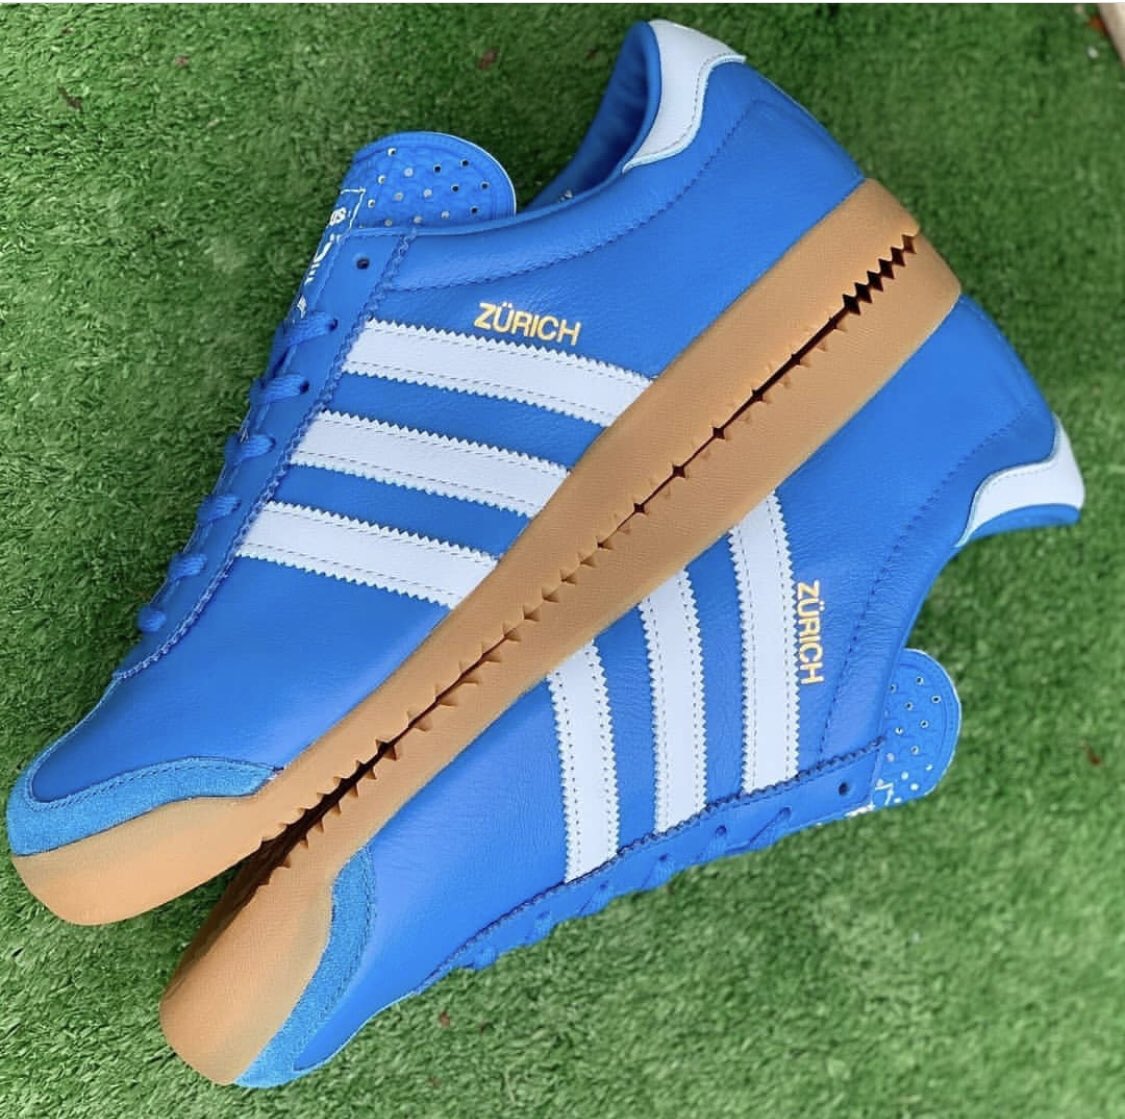 The Casuals Directory on Twitter: Zurich now Online and available for purchase. Shop here: https://t.co/KLIl1kqKph Price: £85 #adidas #adidaszurich https://t.co/LHZUnRcUvA" / Twitter